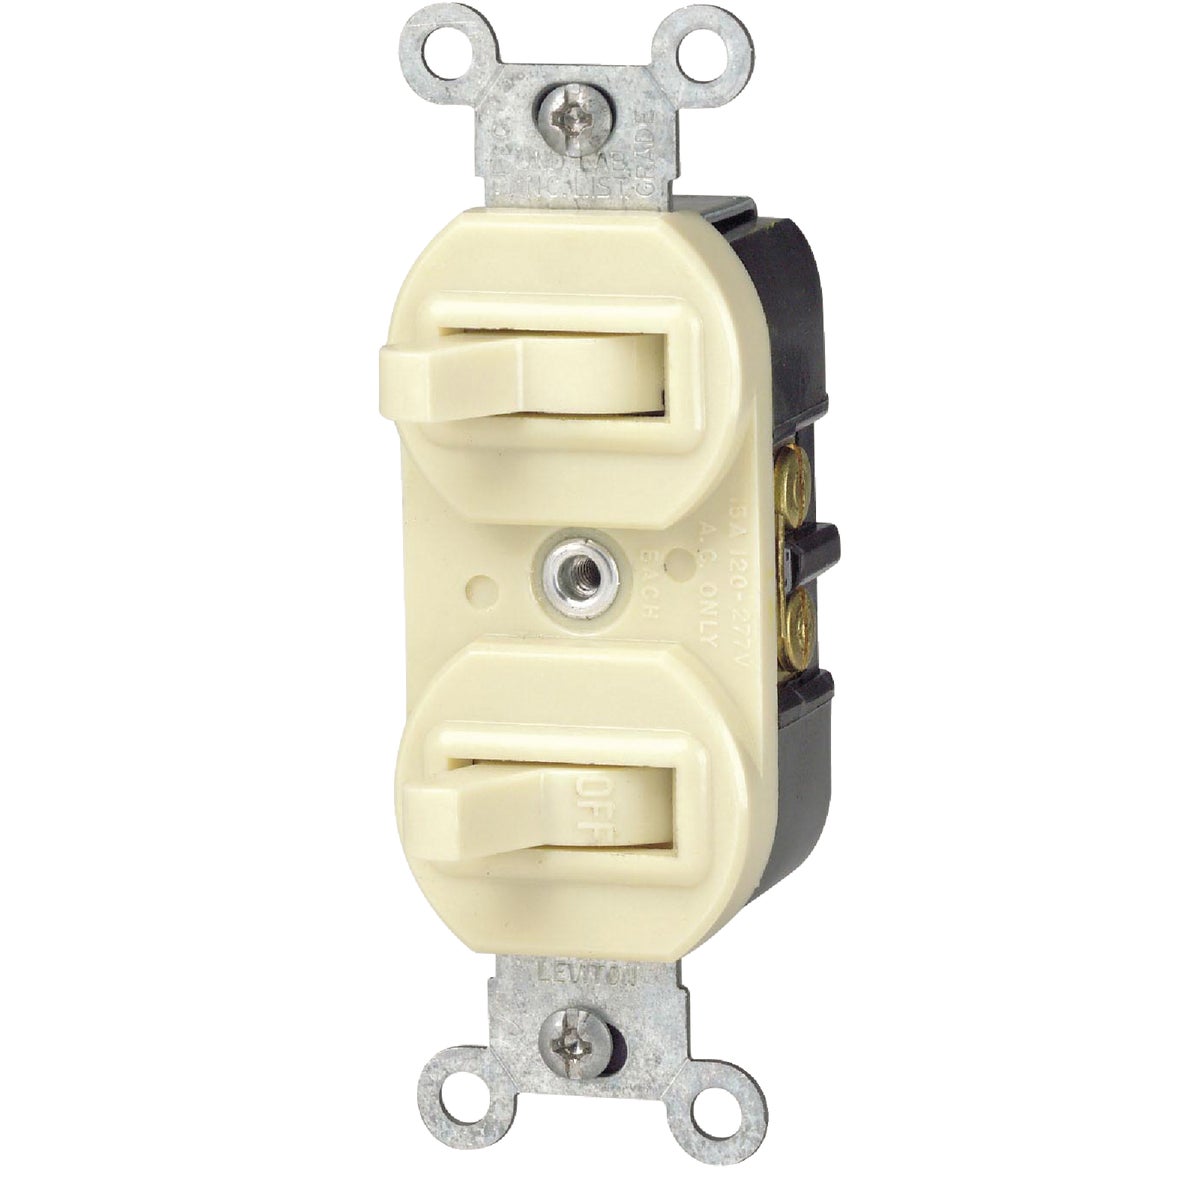 Item 508446, Commercial Specification Grade. Combination single pole and 3-way switch.